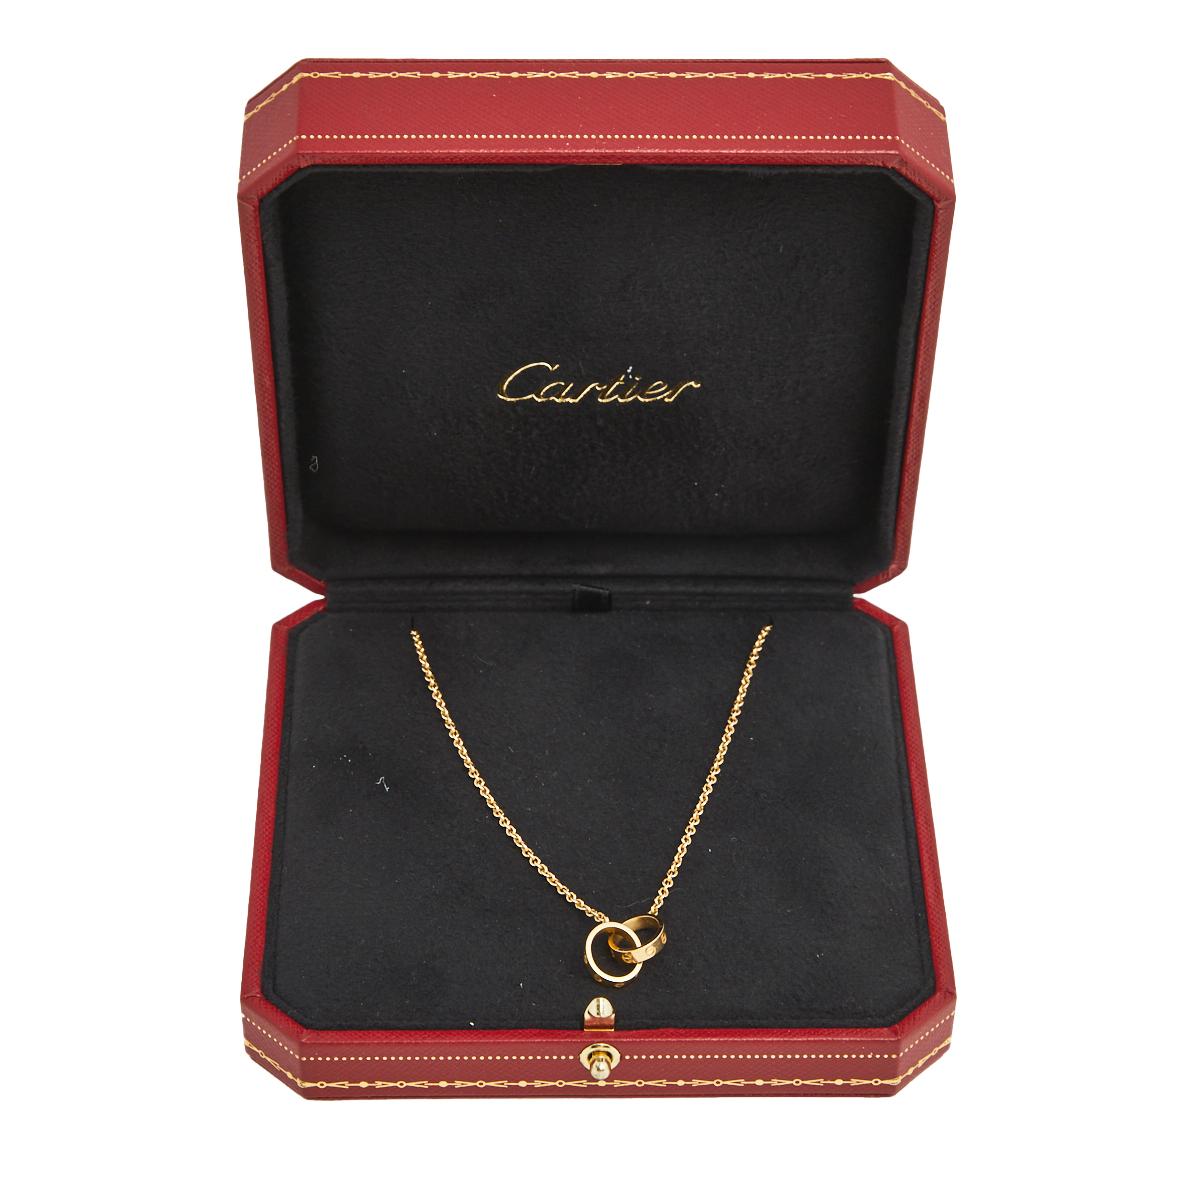 Celebrate timeless love with this necklace from Cartier's Love collection. It is made from 18k yellow gold and the chain holds two magnificent hoops interlocked with one another. Both the rings carry the iconic screw motifs which are a signature of